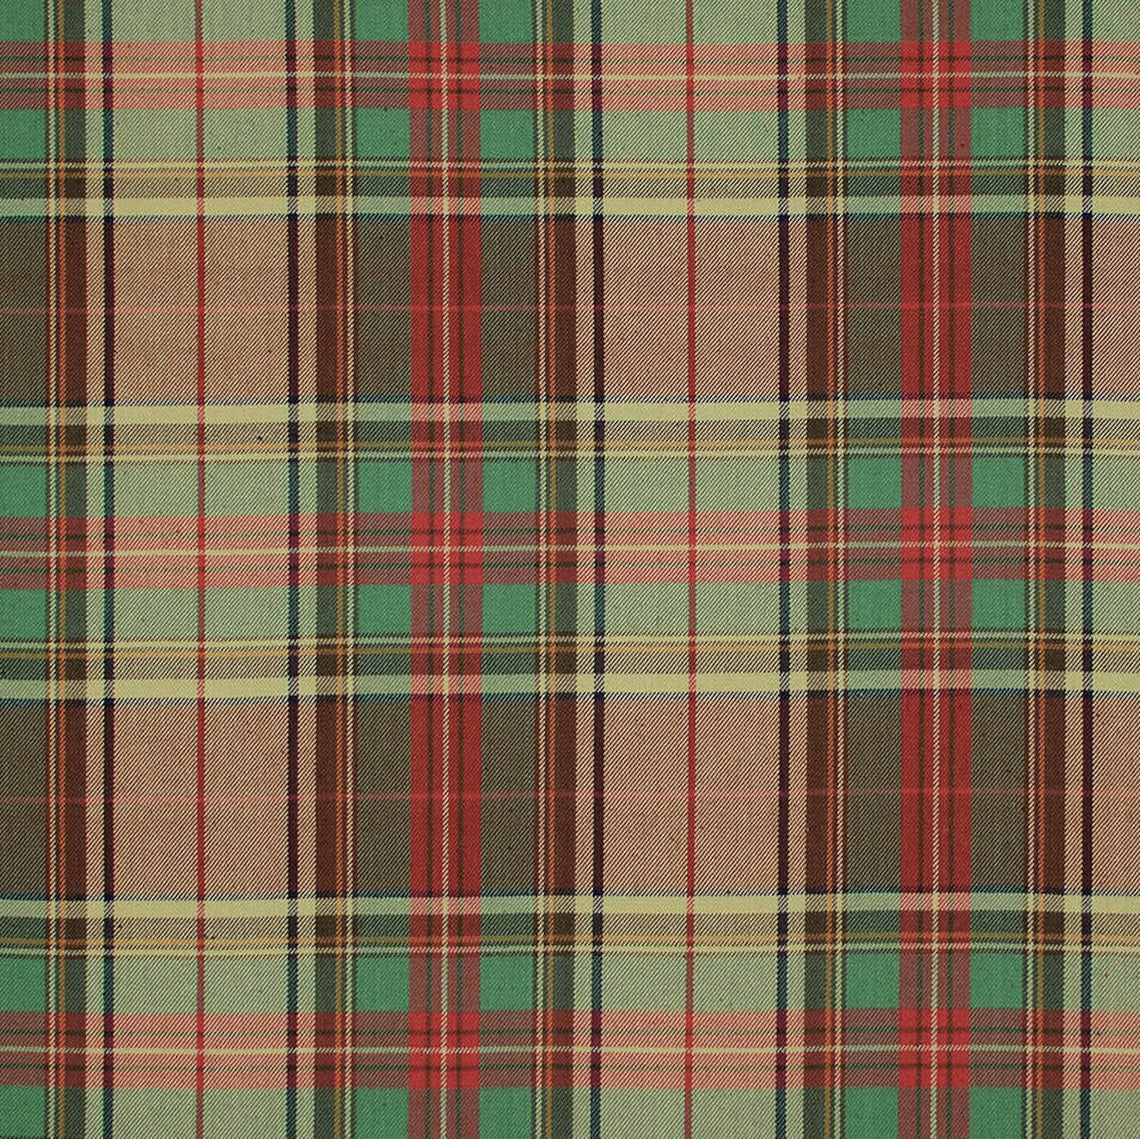 tailored tier cafe curtain panels pair in ancient campbell ivy league tartan plaid